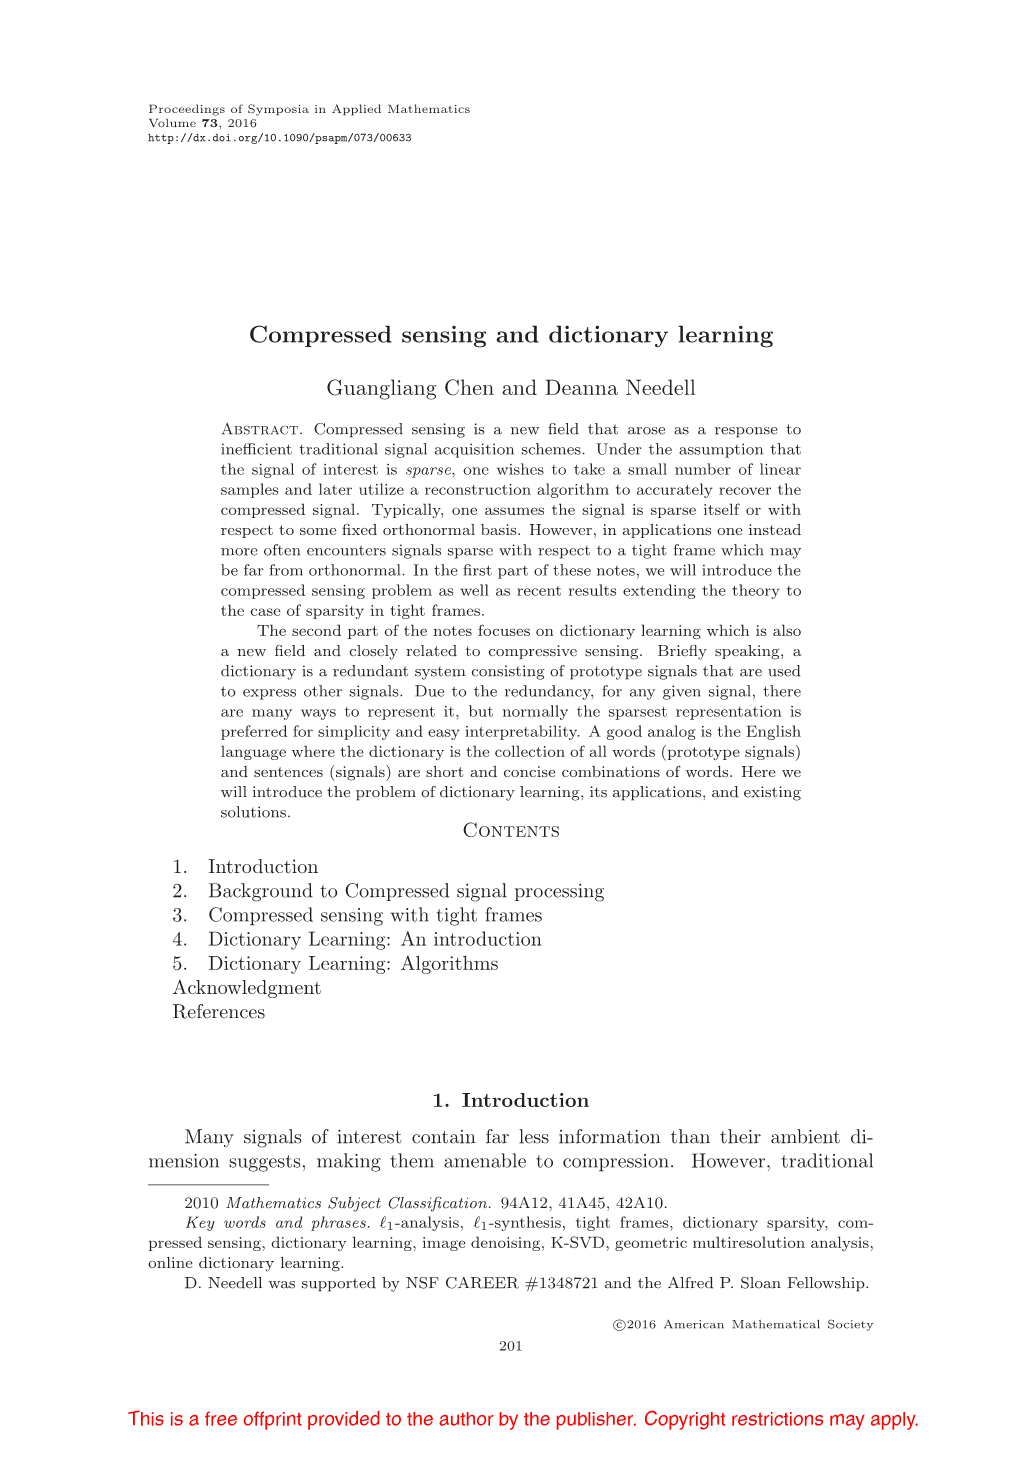 Compressed Sensing and Dictionary Learning